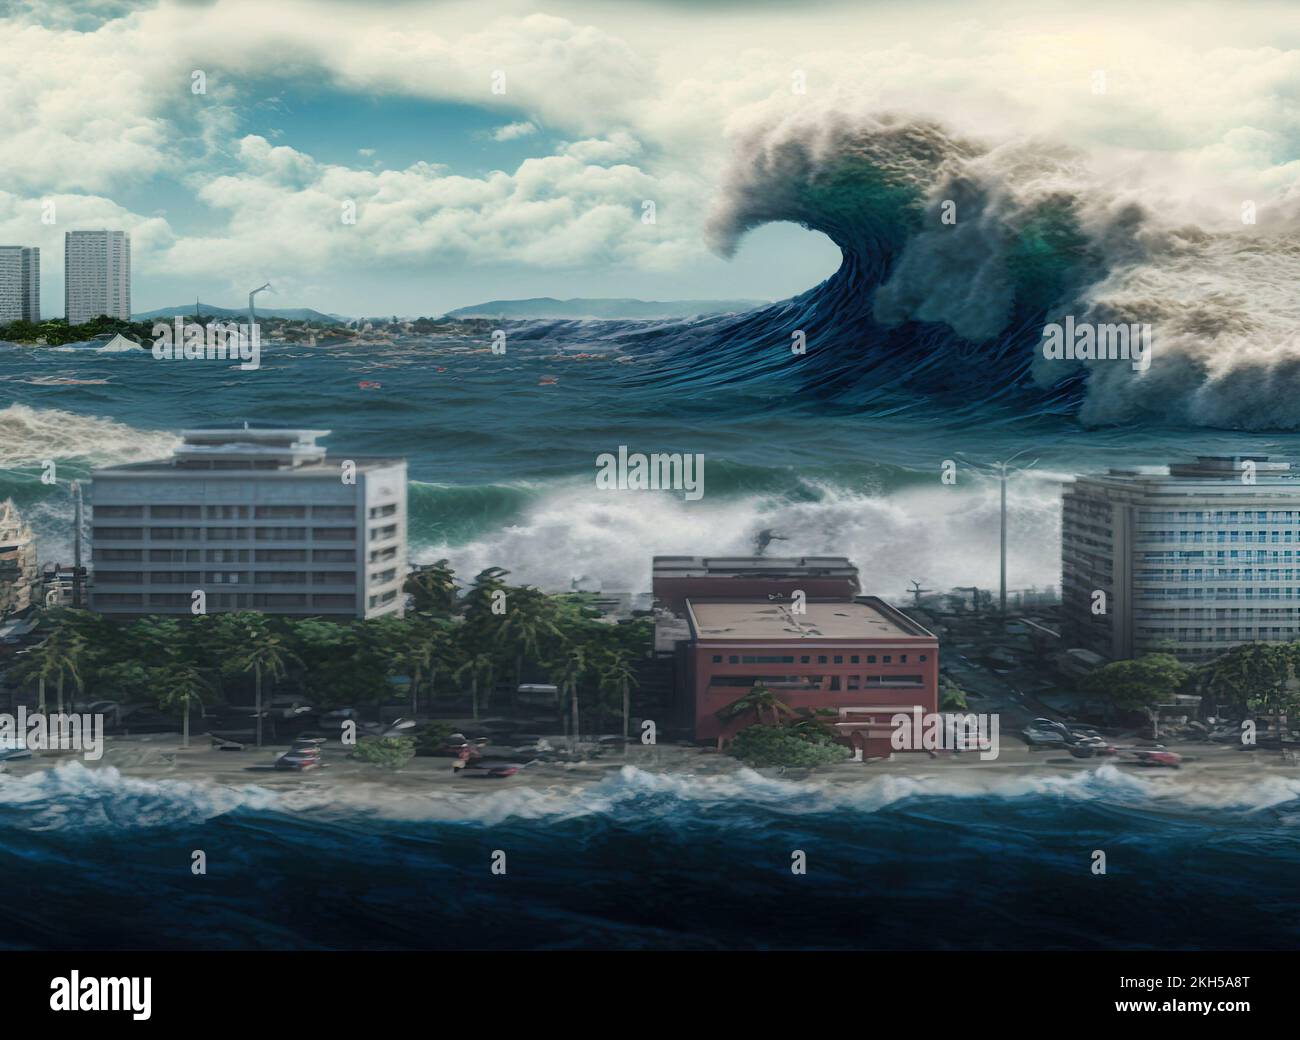 A 100-foot-high mega-tsunami is destroying an urban beach on a tropical coast. Climate change has caused many tragic disasters with natural phenomena. Stock Photo